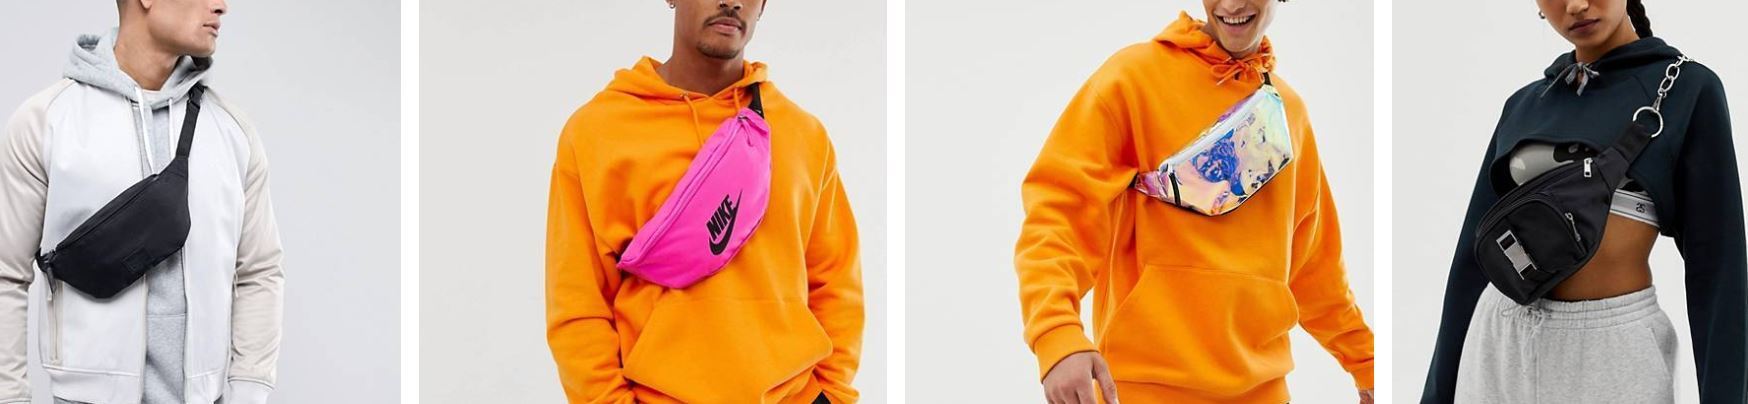 Places to Buy Fanny Packs - ASOS